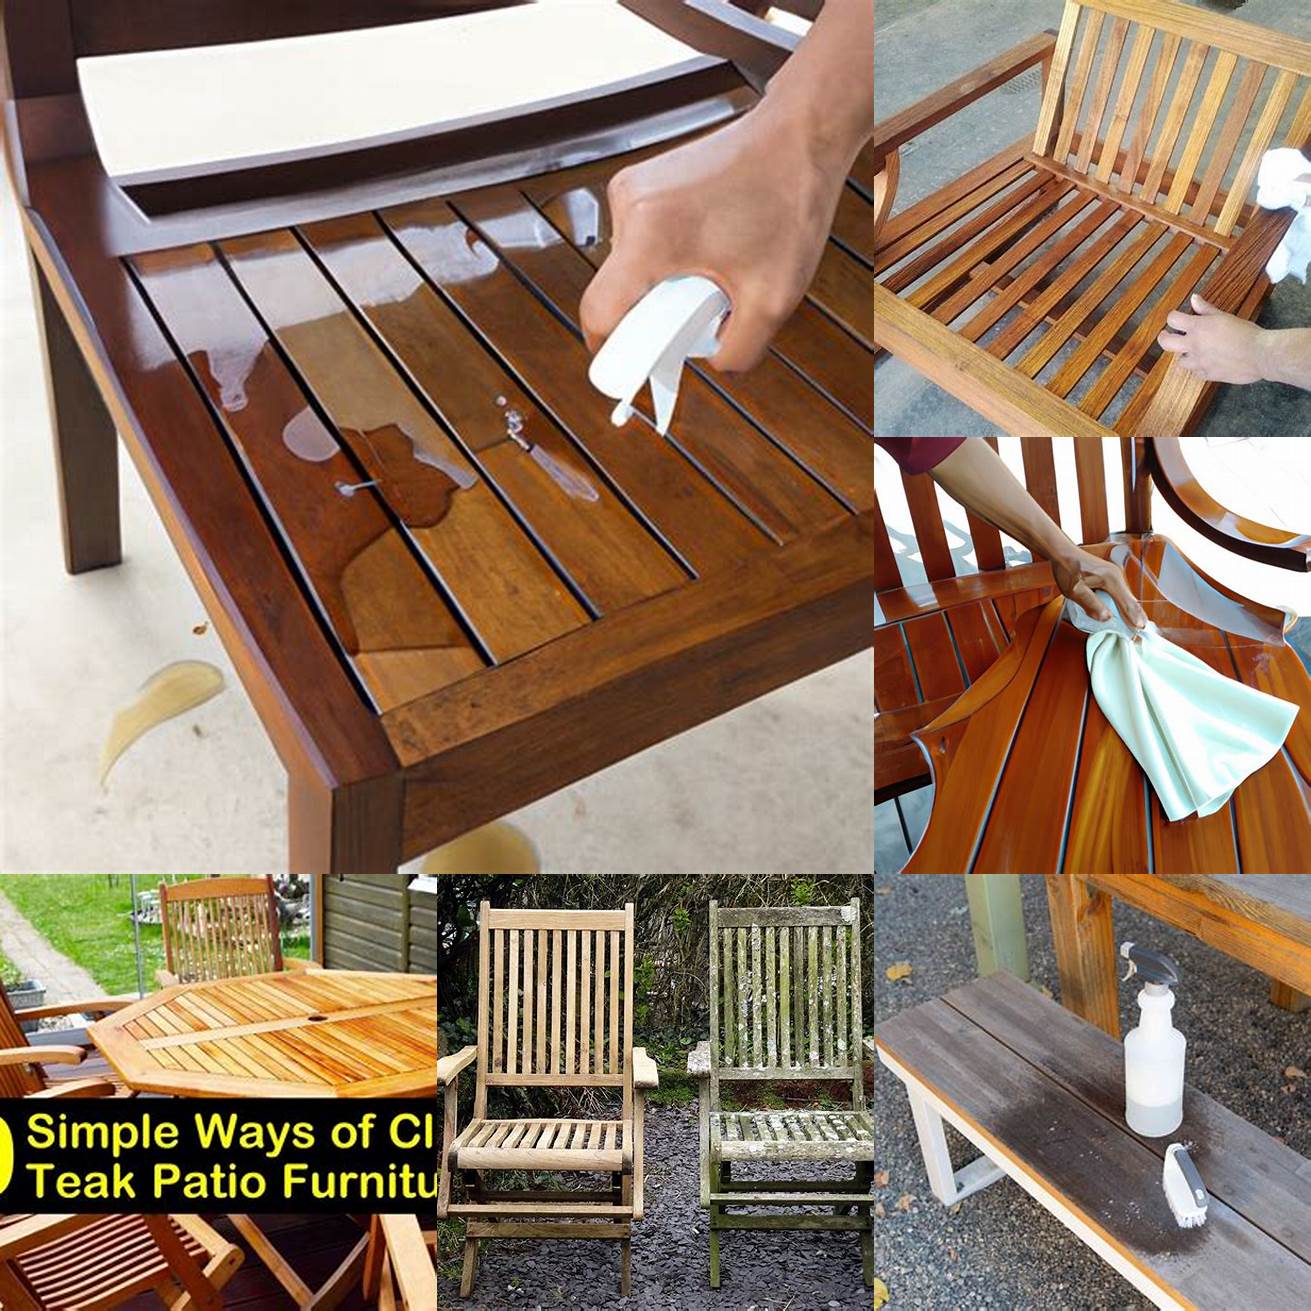 Cleaning and Maintaining Teak Furniture